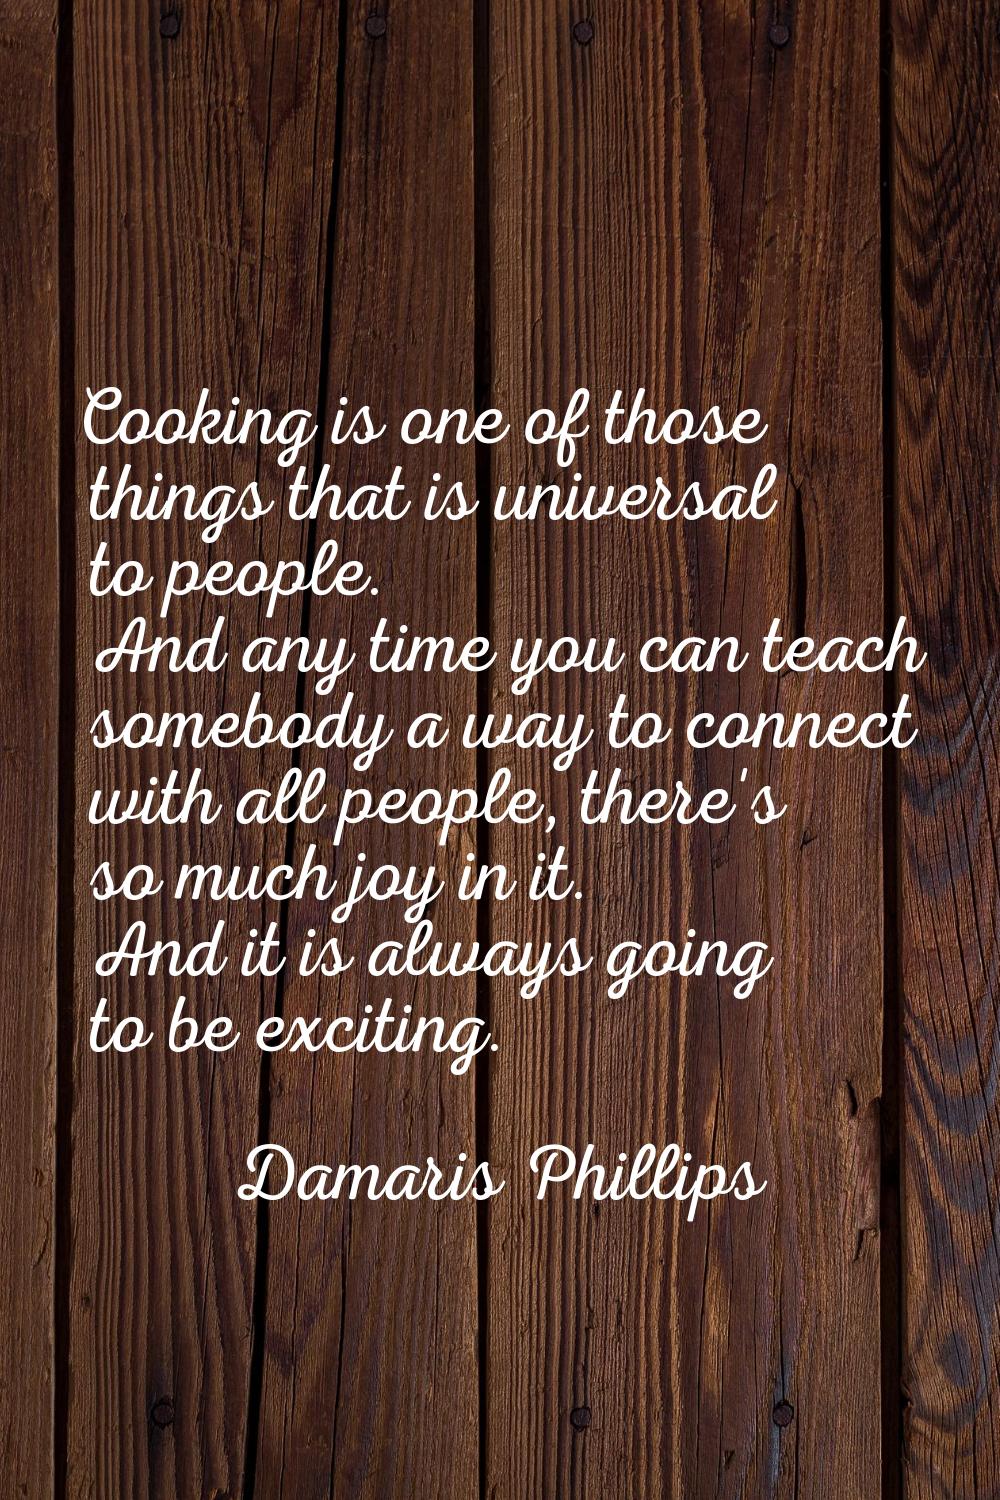 Cooking is one of those things that is universal to people. And any time you can teach somebody a w